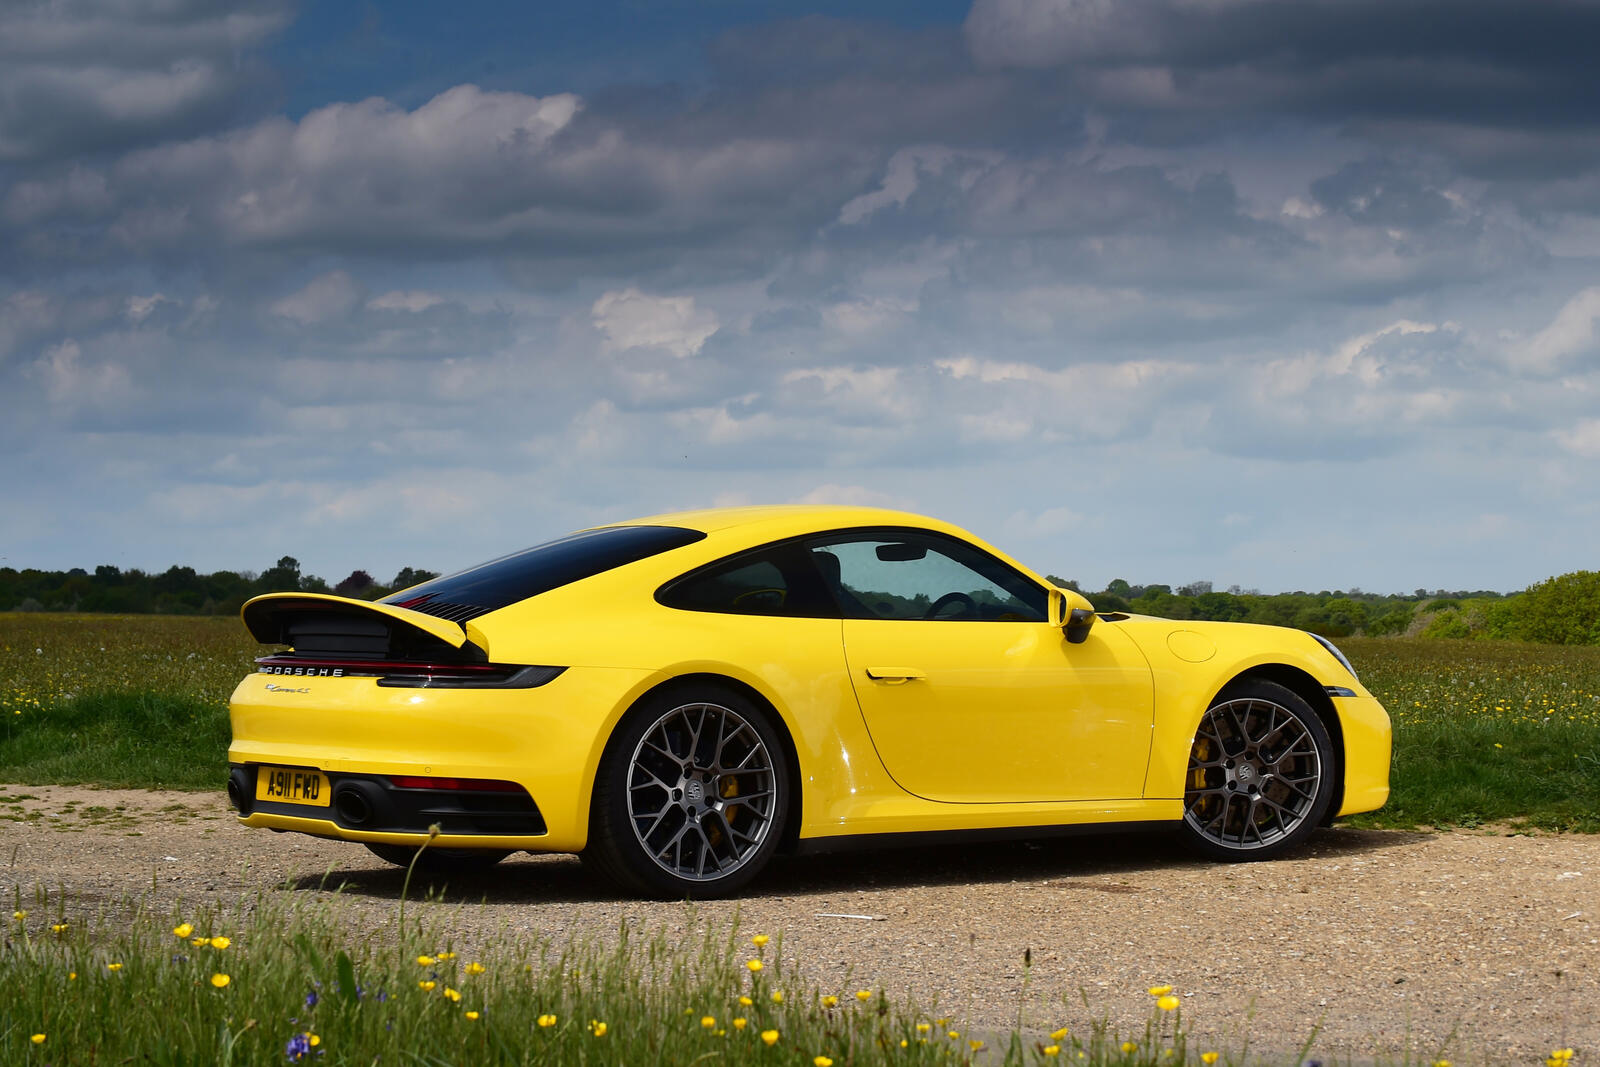 Free photo A yellow Porsche 911 with gray rims stands on a dirt road